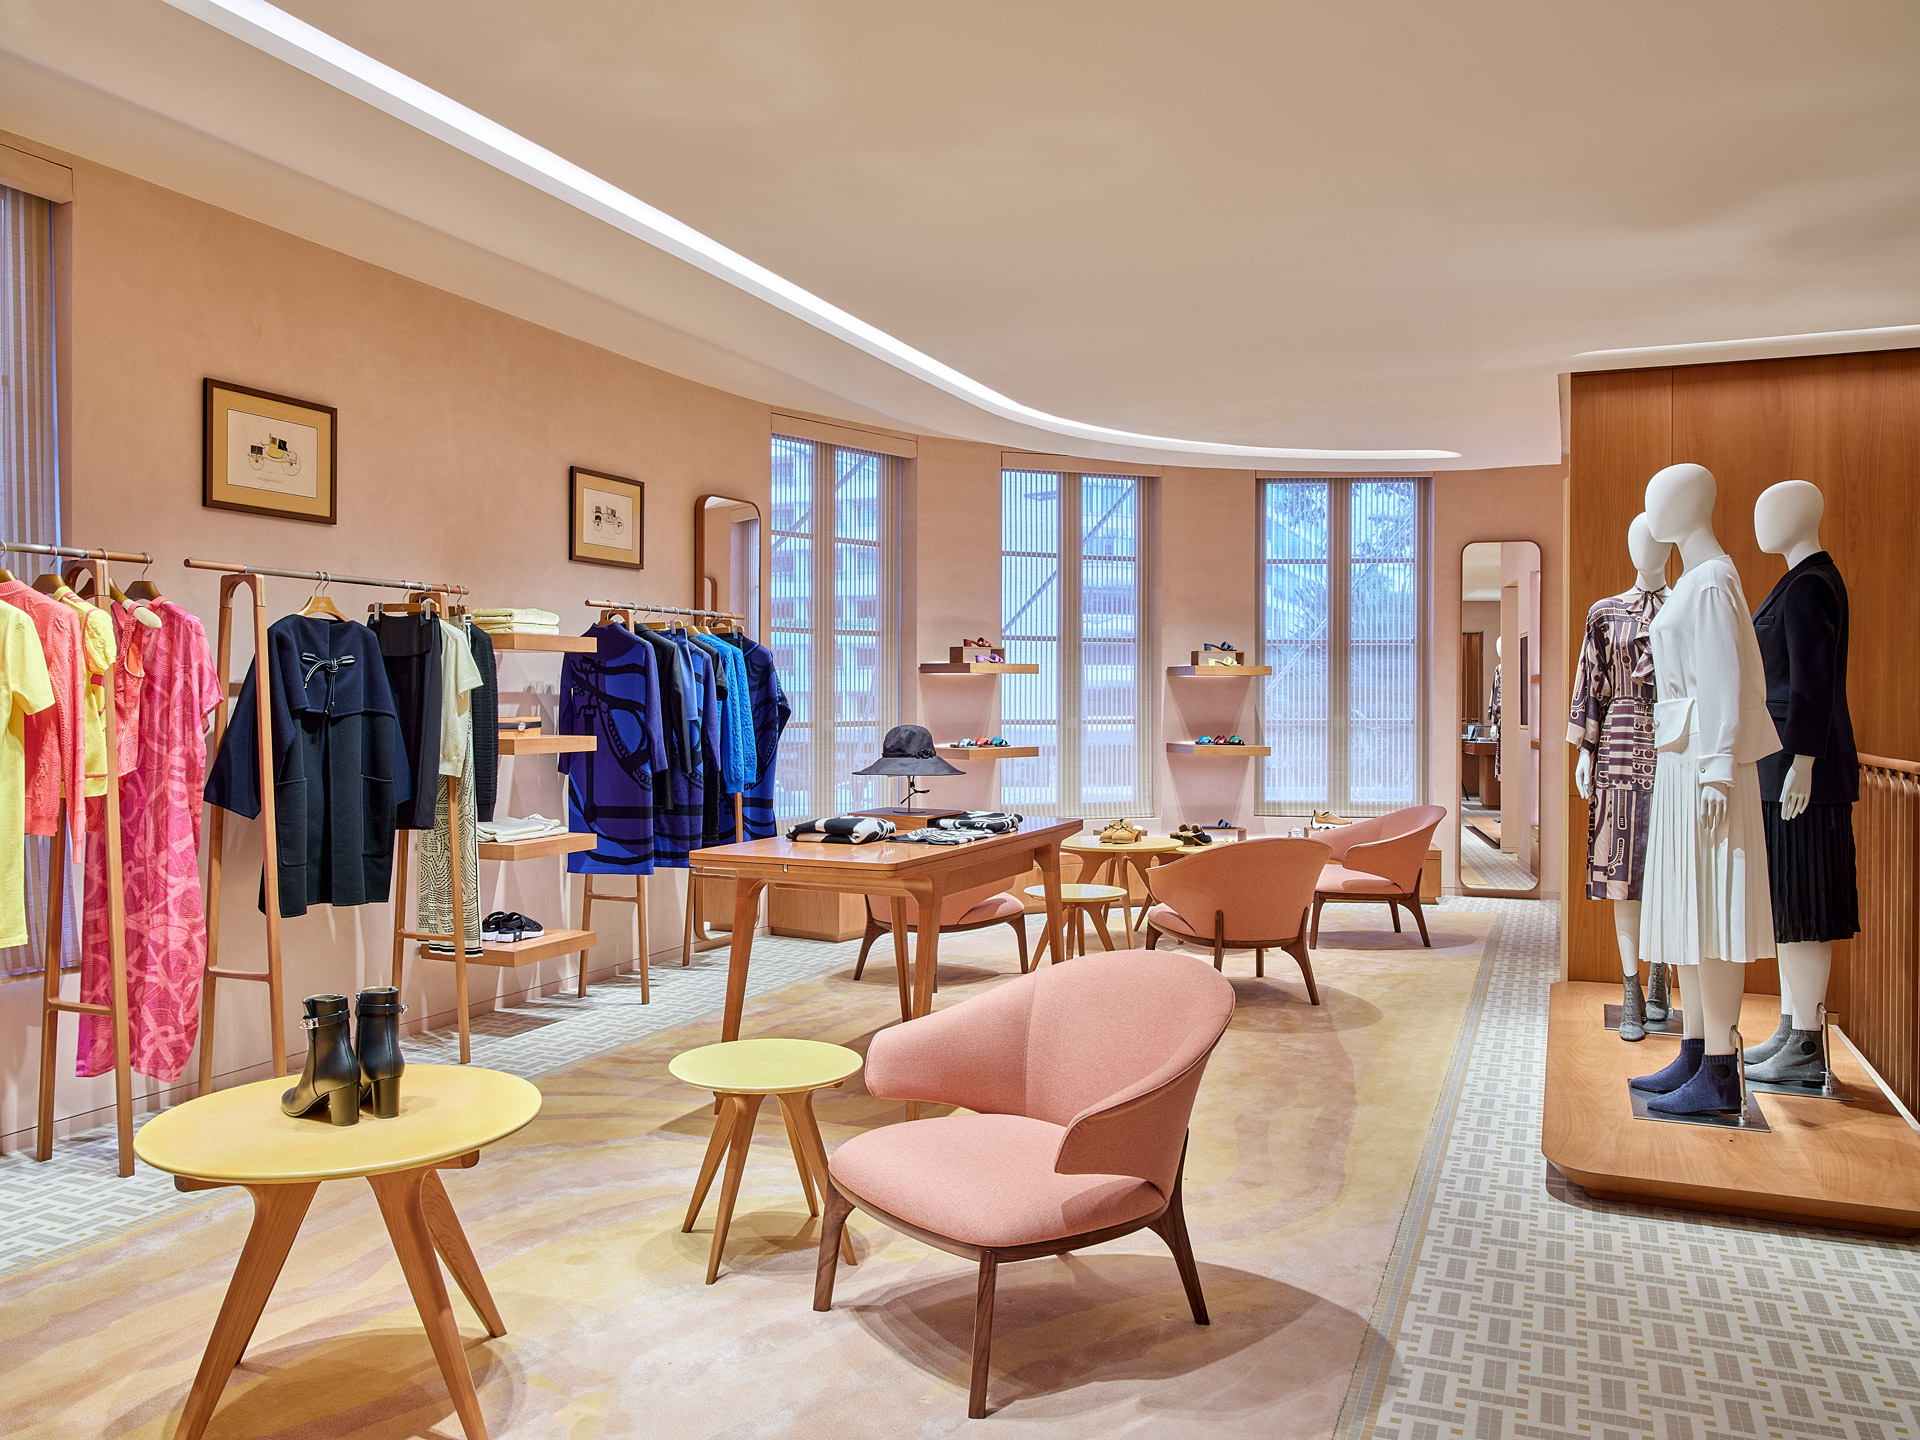 Hermès opens a new expanded store in HCMC's Union Square - Union Square ...